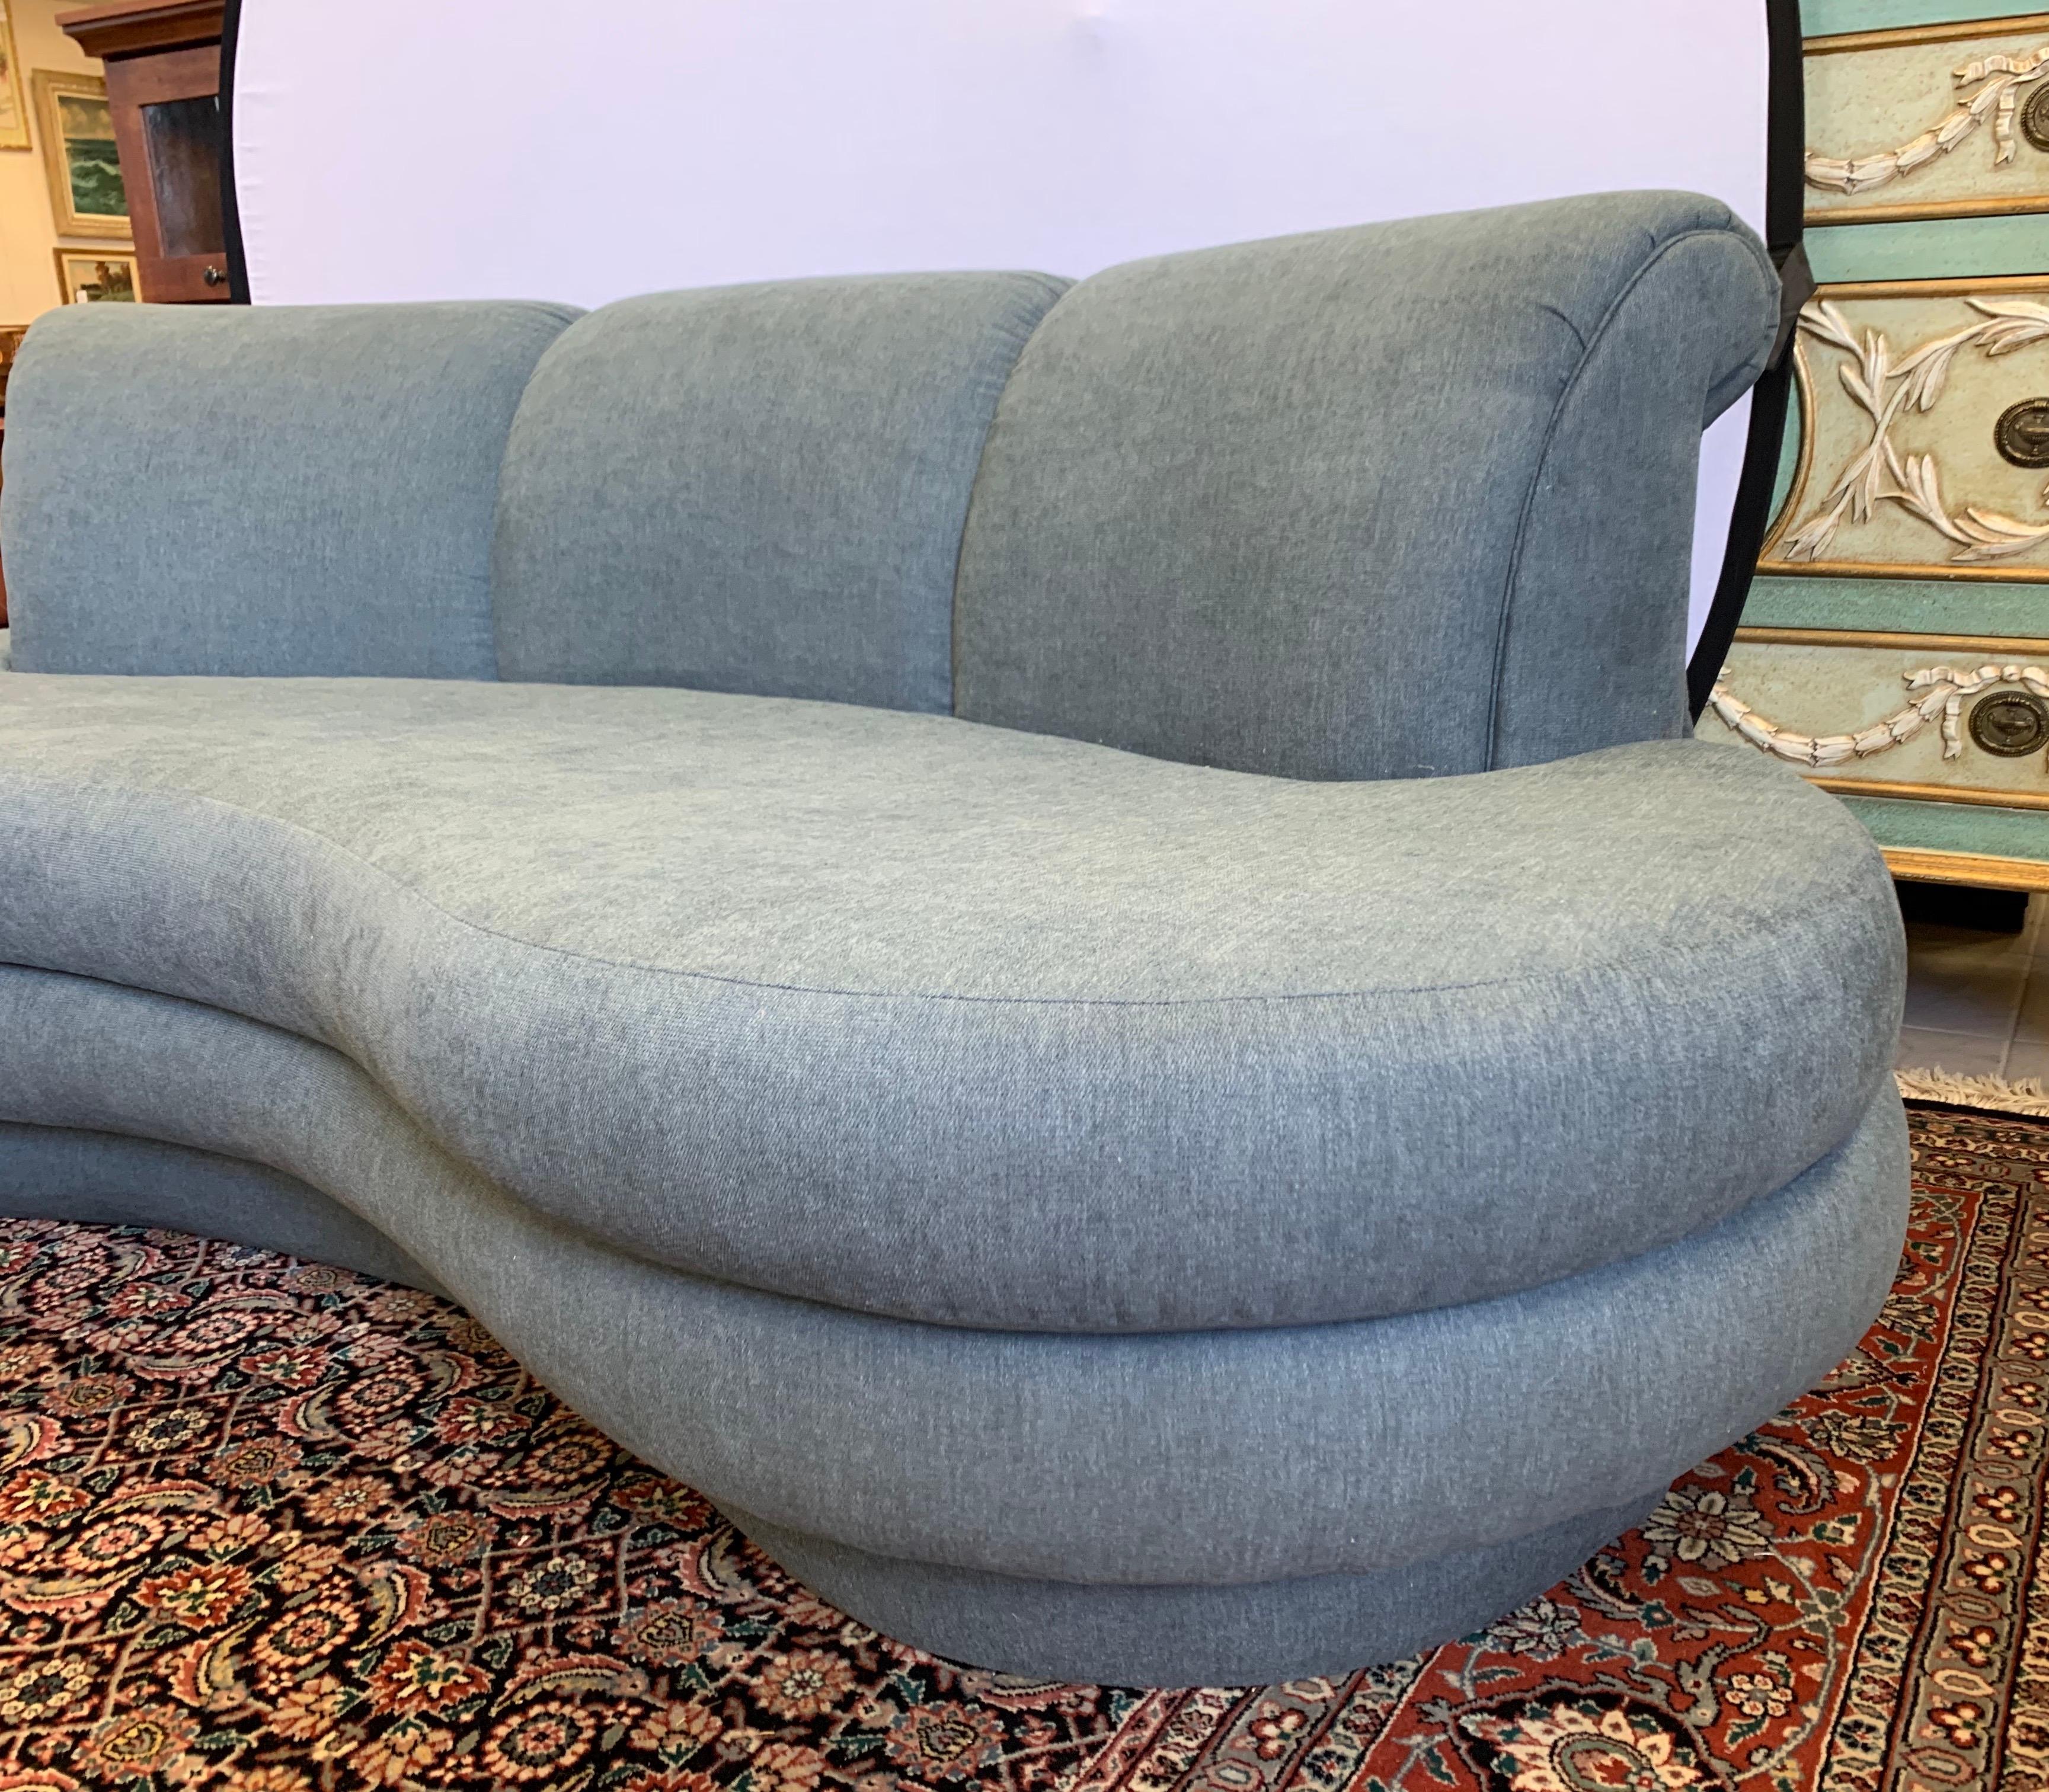 Fabric Adrian Pearsall Cloud Sofa for Comfort Designs Newly Upholstered in Slate Gray 